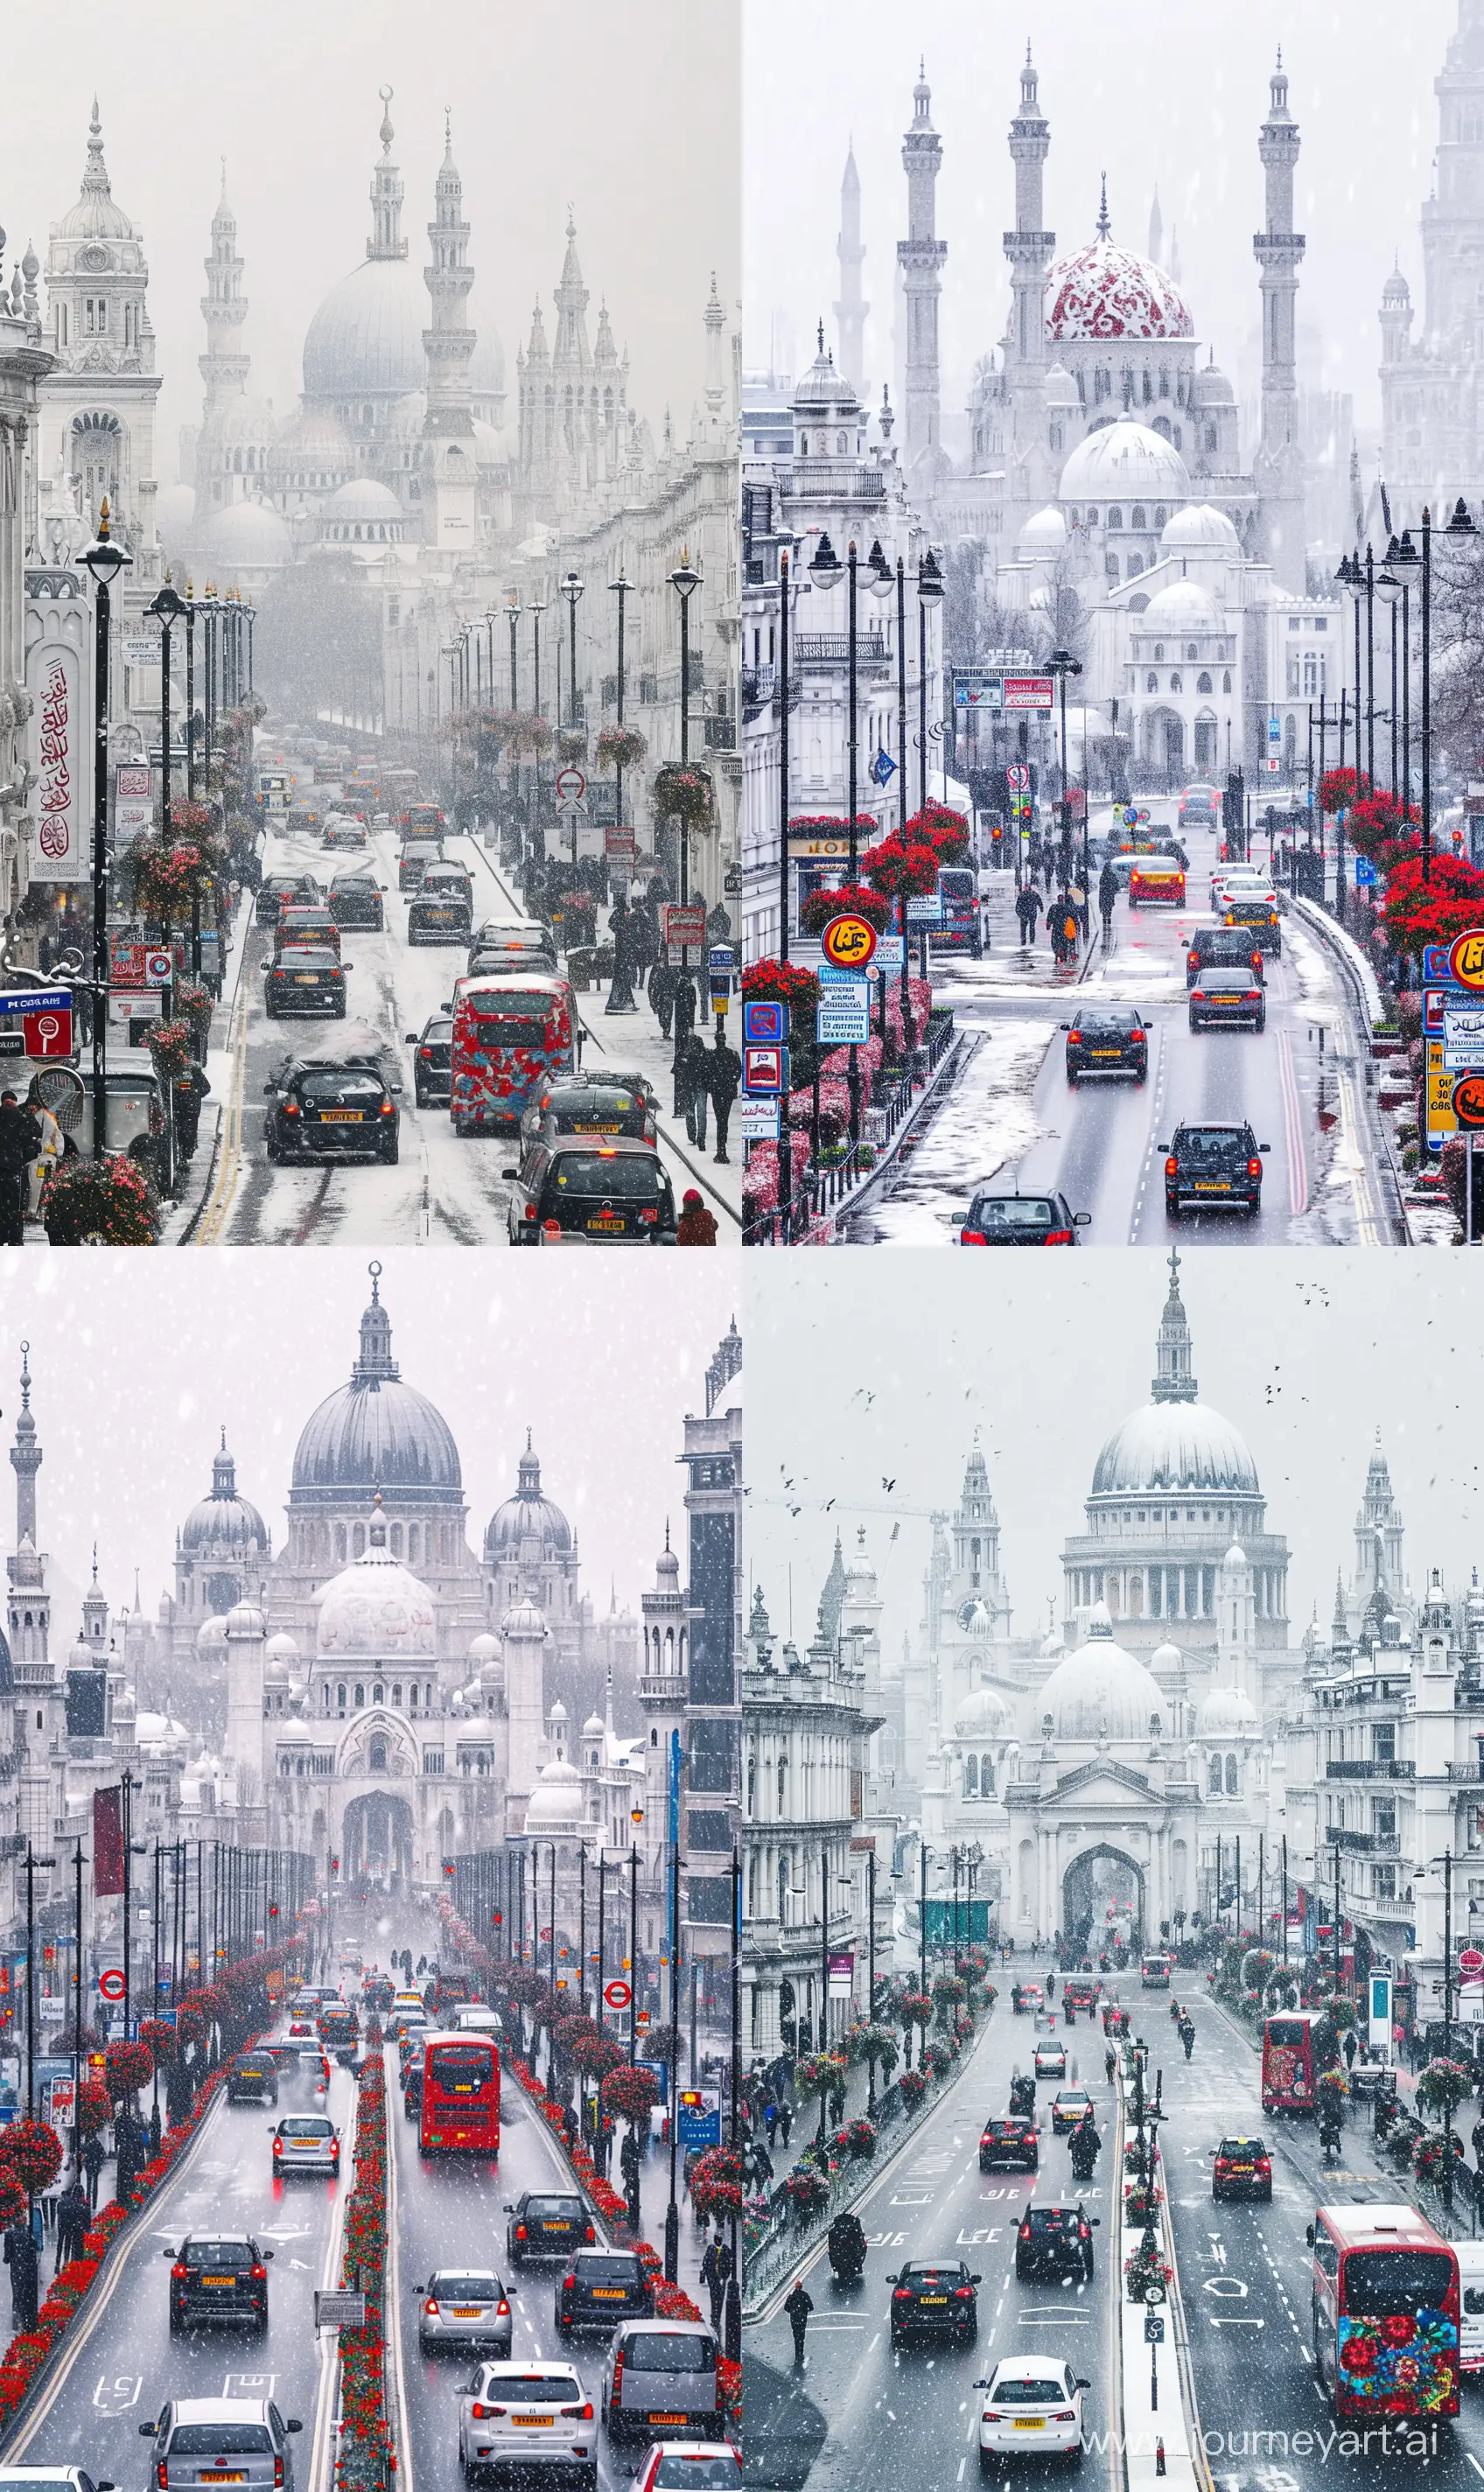 Realistic cityscape photography: a city full of medieval beautiful Islamic architectures and mosques, white marbled decorated with red blue pietra dura floral motifs, traffic and people on planned London like roads having signboards and bollards and flowers and street lamps, snowfall --ar 3:5 --v 6